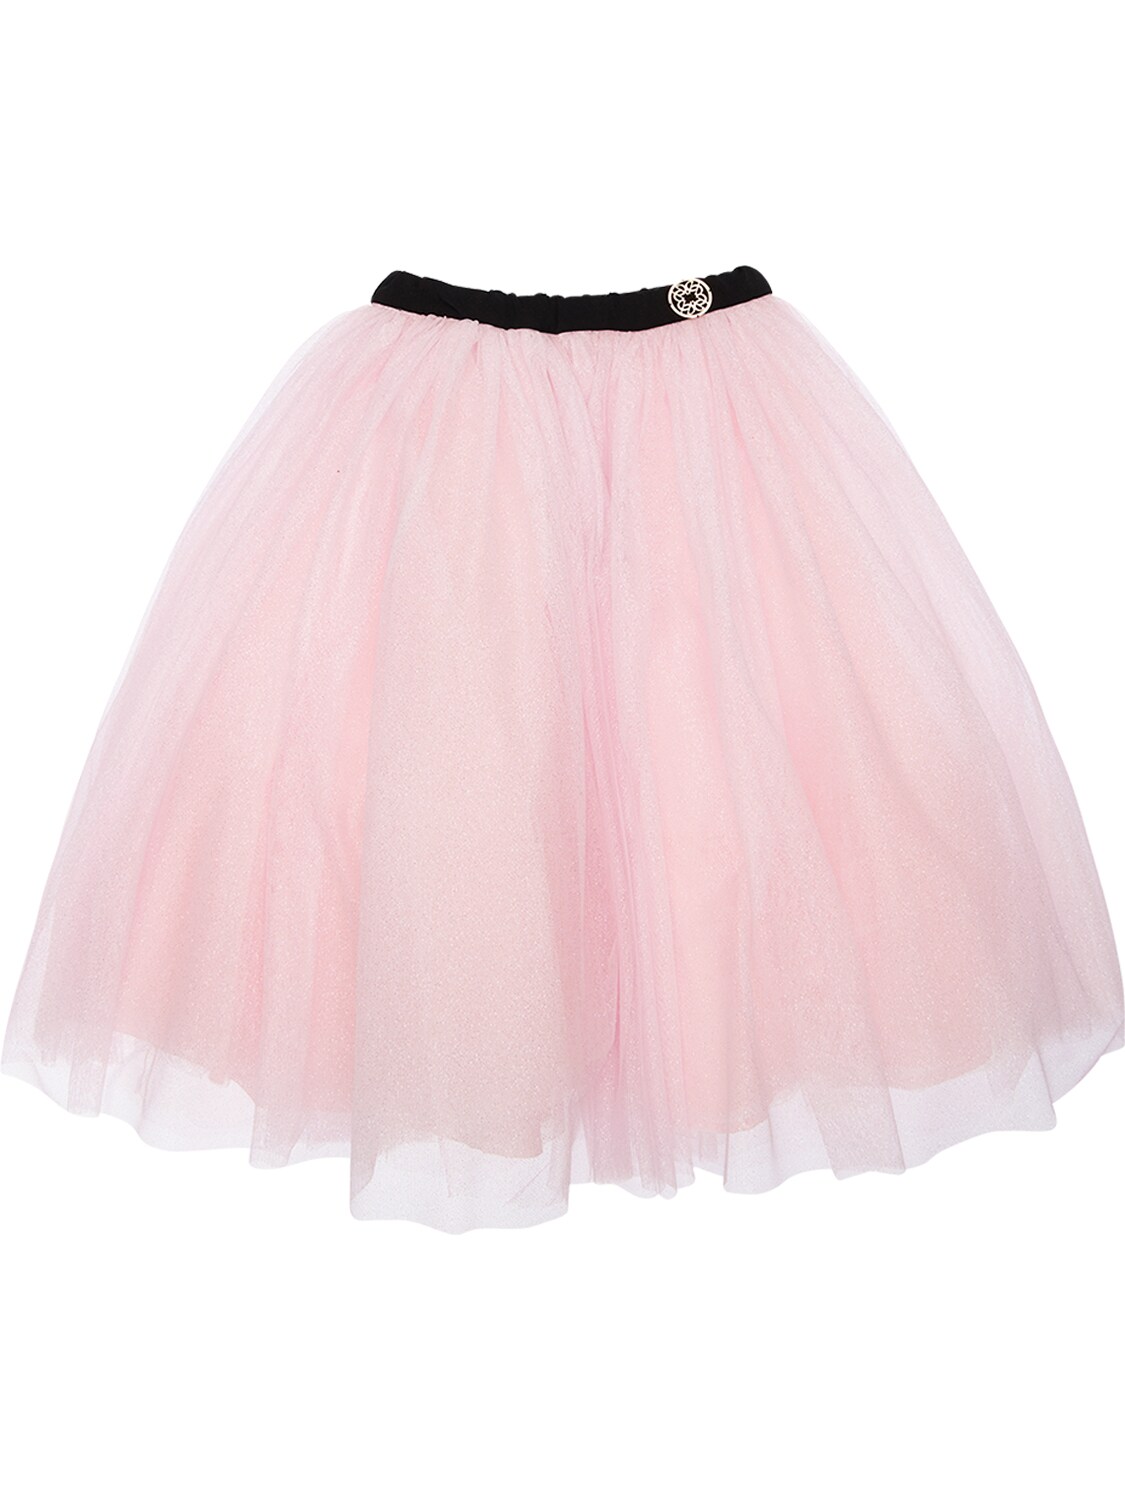 Elie Saab Kids' Glittered Stretch Tulle Skirt In Pink